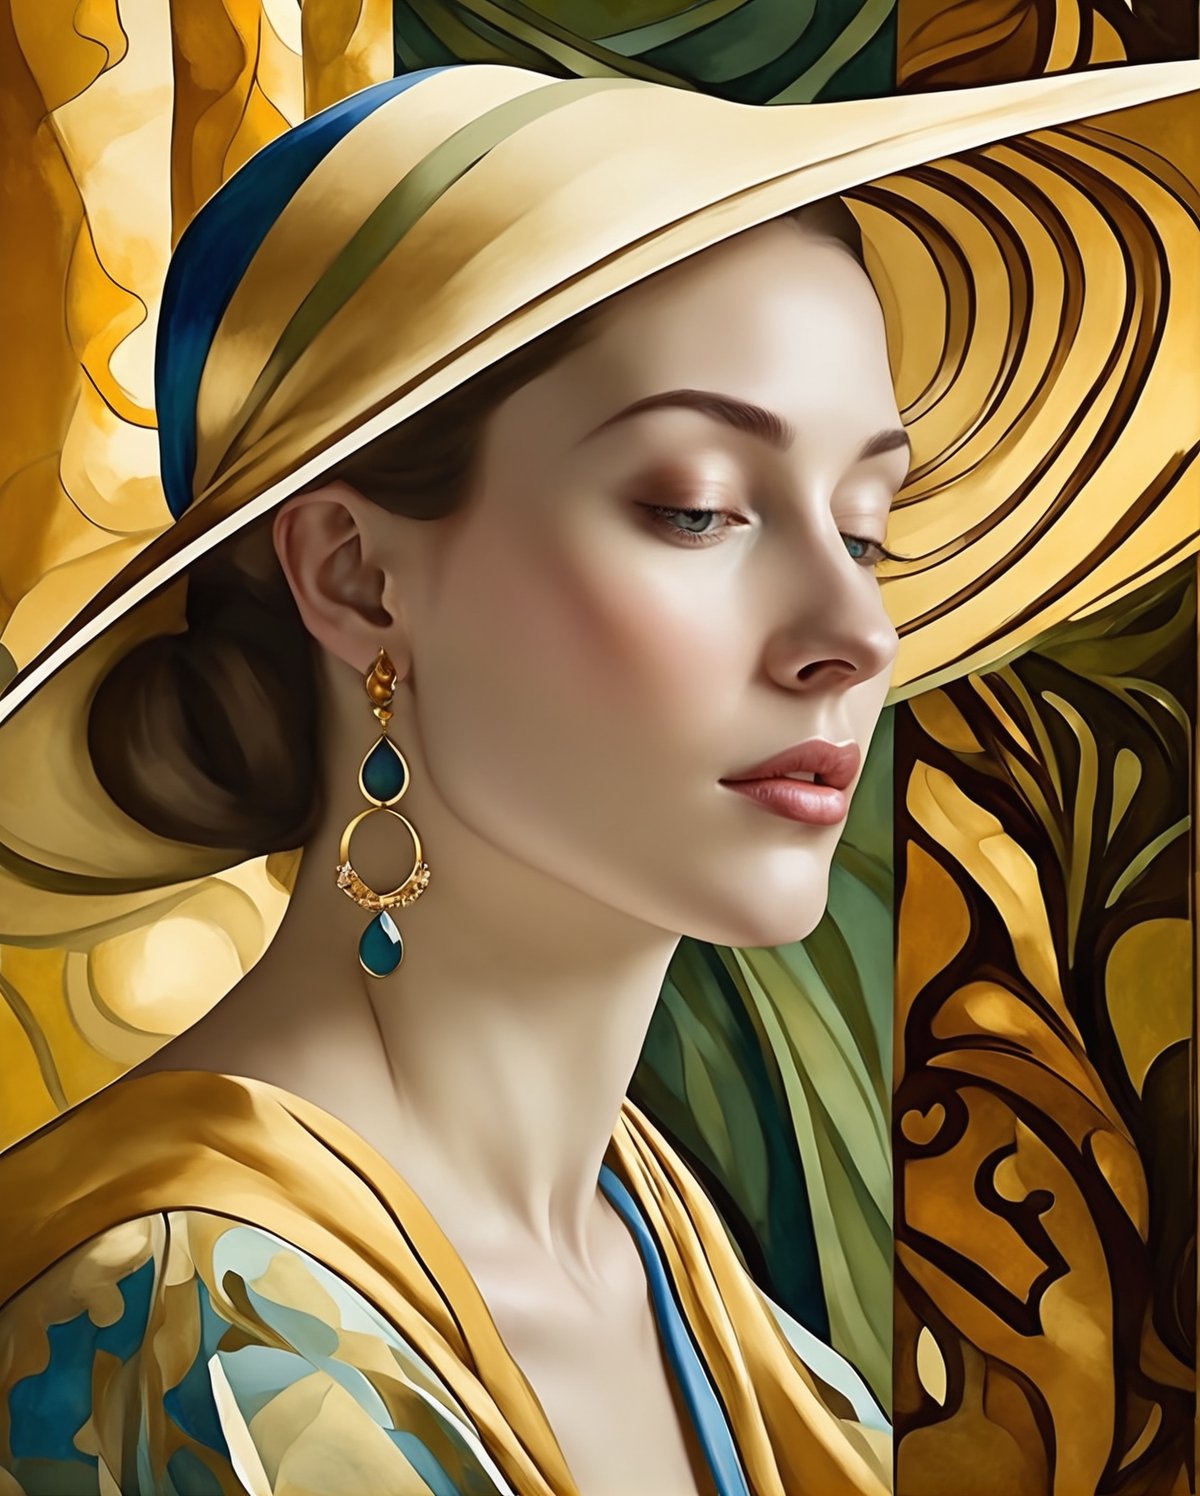 Create an enchanting Art Nouveau-inspired female illustration that seamlessly melds the exquisite style of Johannes Vermeer. Embrace Vermeer's mastery of light, delicate color palettes, and meticulous detail in portraying domestic scenes. Infuse the Art Nouveau touch by incorporating flowing lines, organic forms, and ornate patterns reminiscent of the era. Illuminate the subject with soft, ethereal lighting, enhancing the inherent grace and sophistication. Capture a moment of quiet beauty, echoing Vermeer's narrative charm, while introducing the graceful curves and decorative elements characteristic of Art Nouveau. This prompt challenges the artist to harmoniously blend two distinct yet captivating artistic legacies.